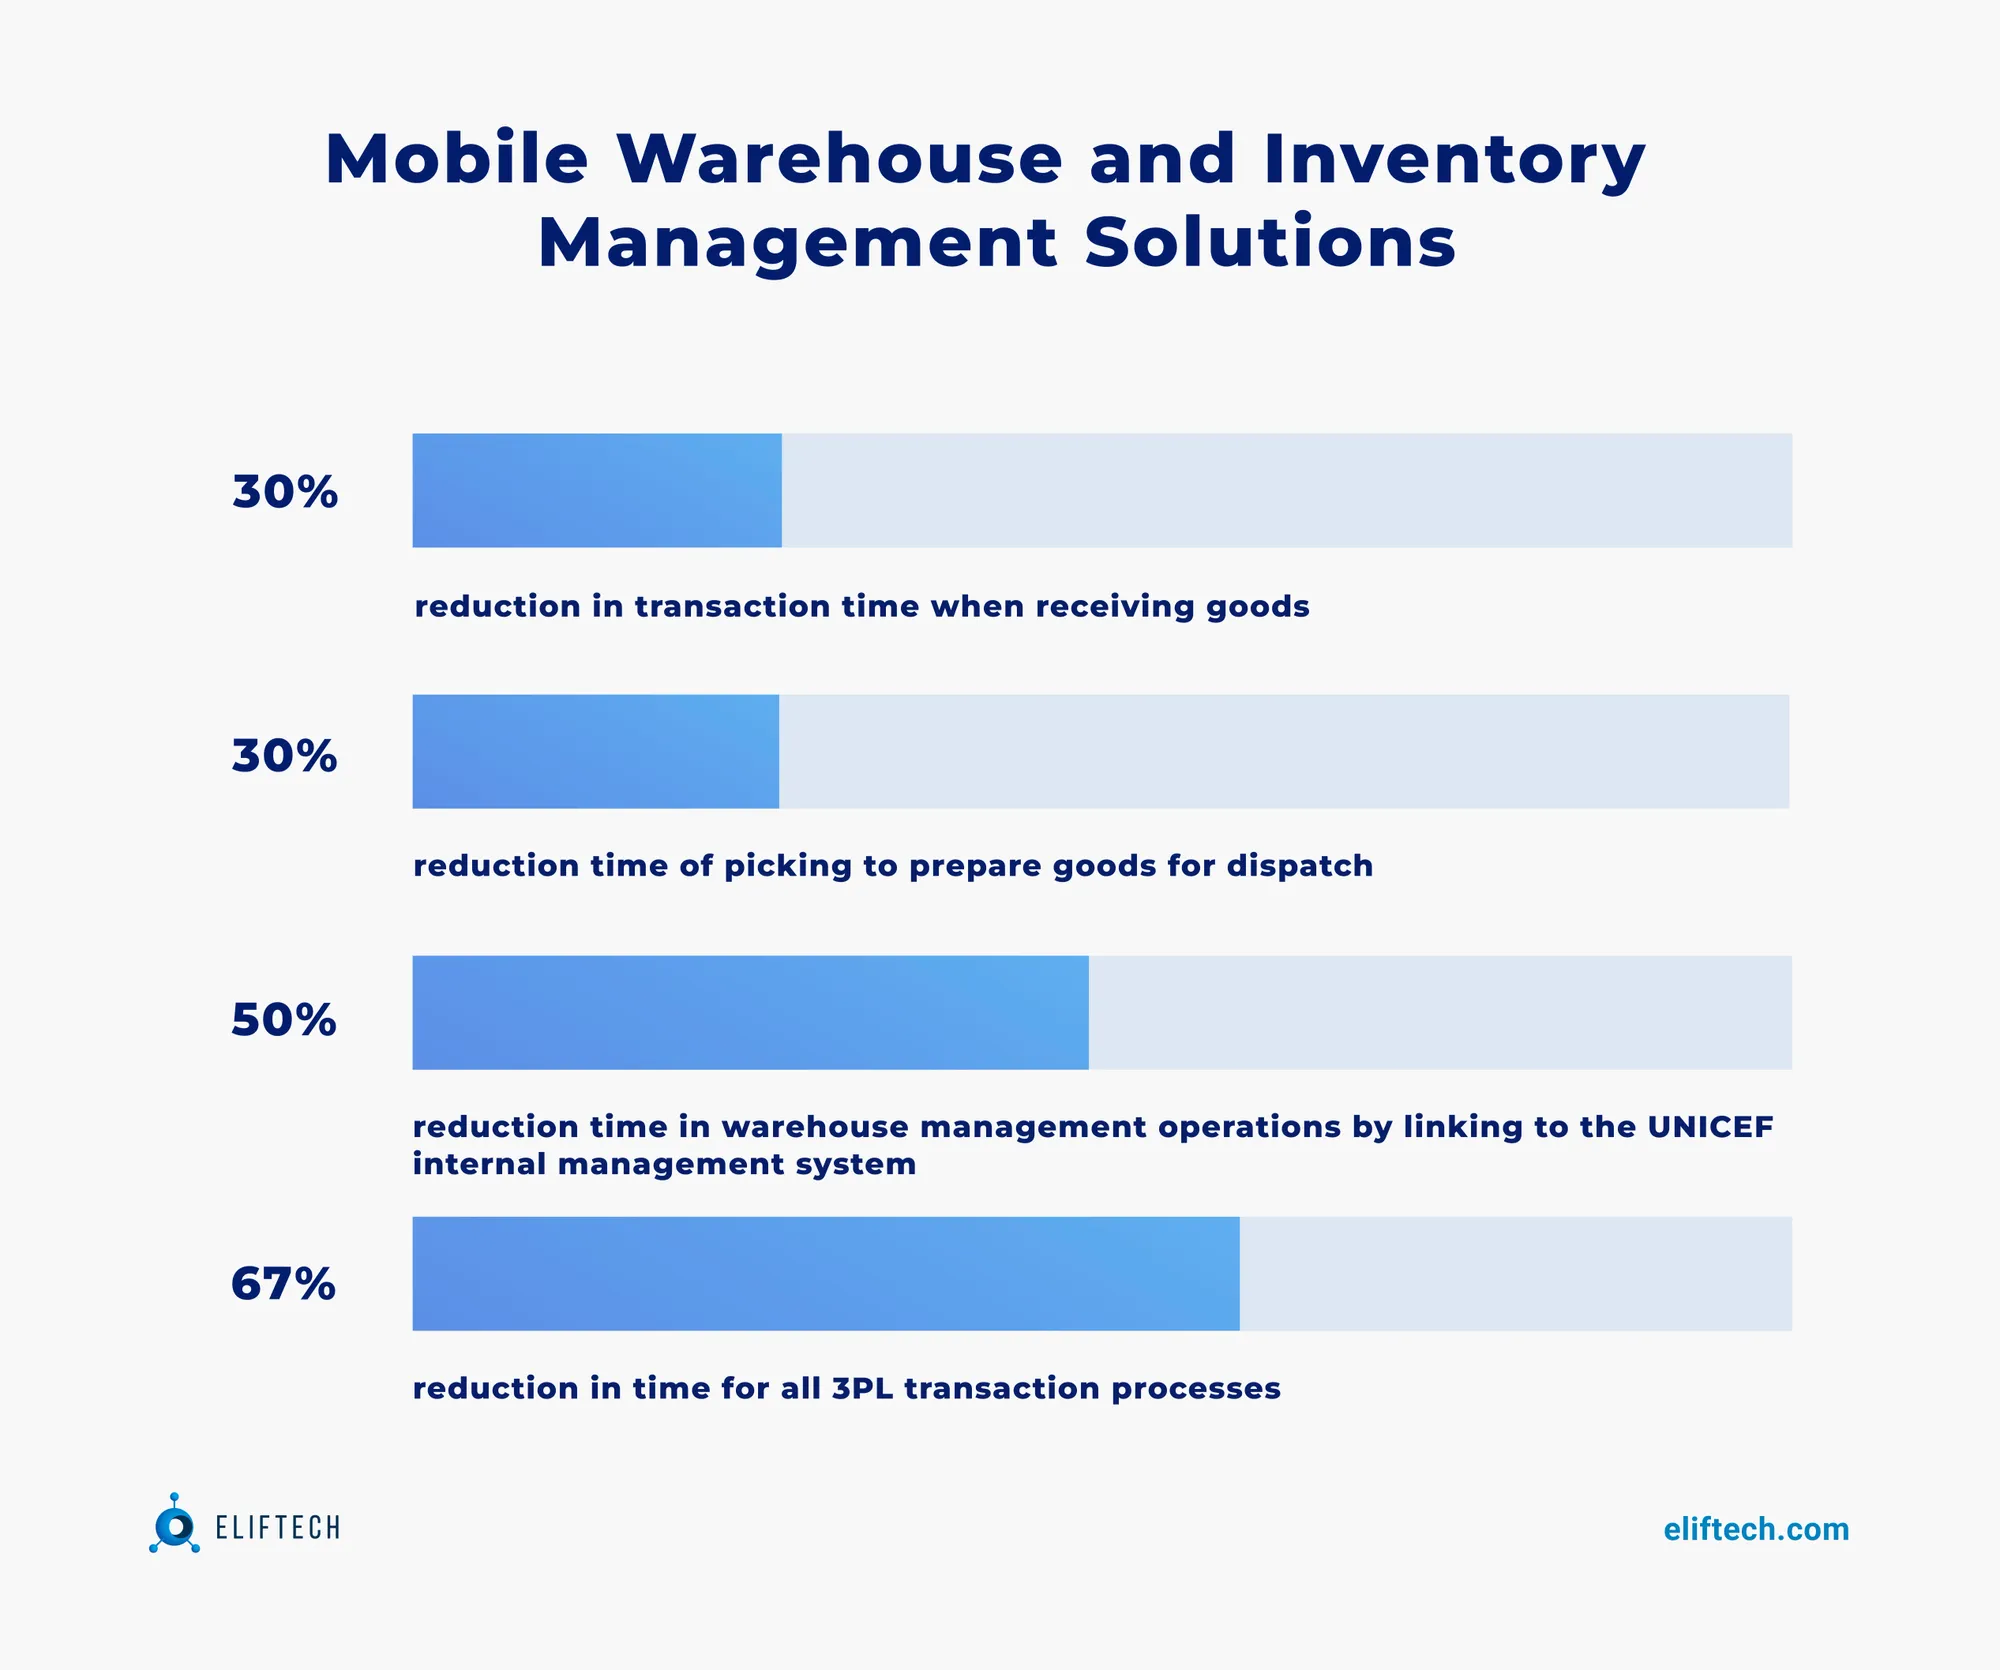 Impact of mobile warehouse solutions on warehouse efficiency